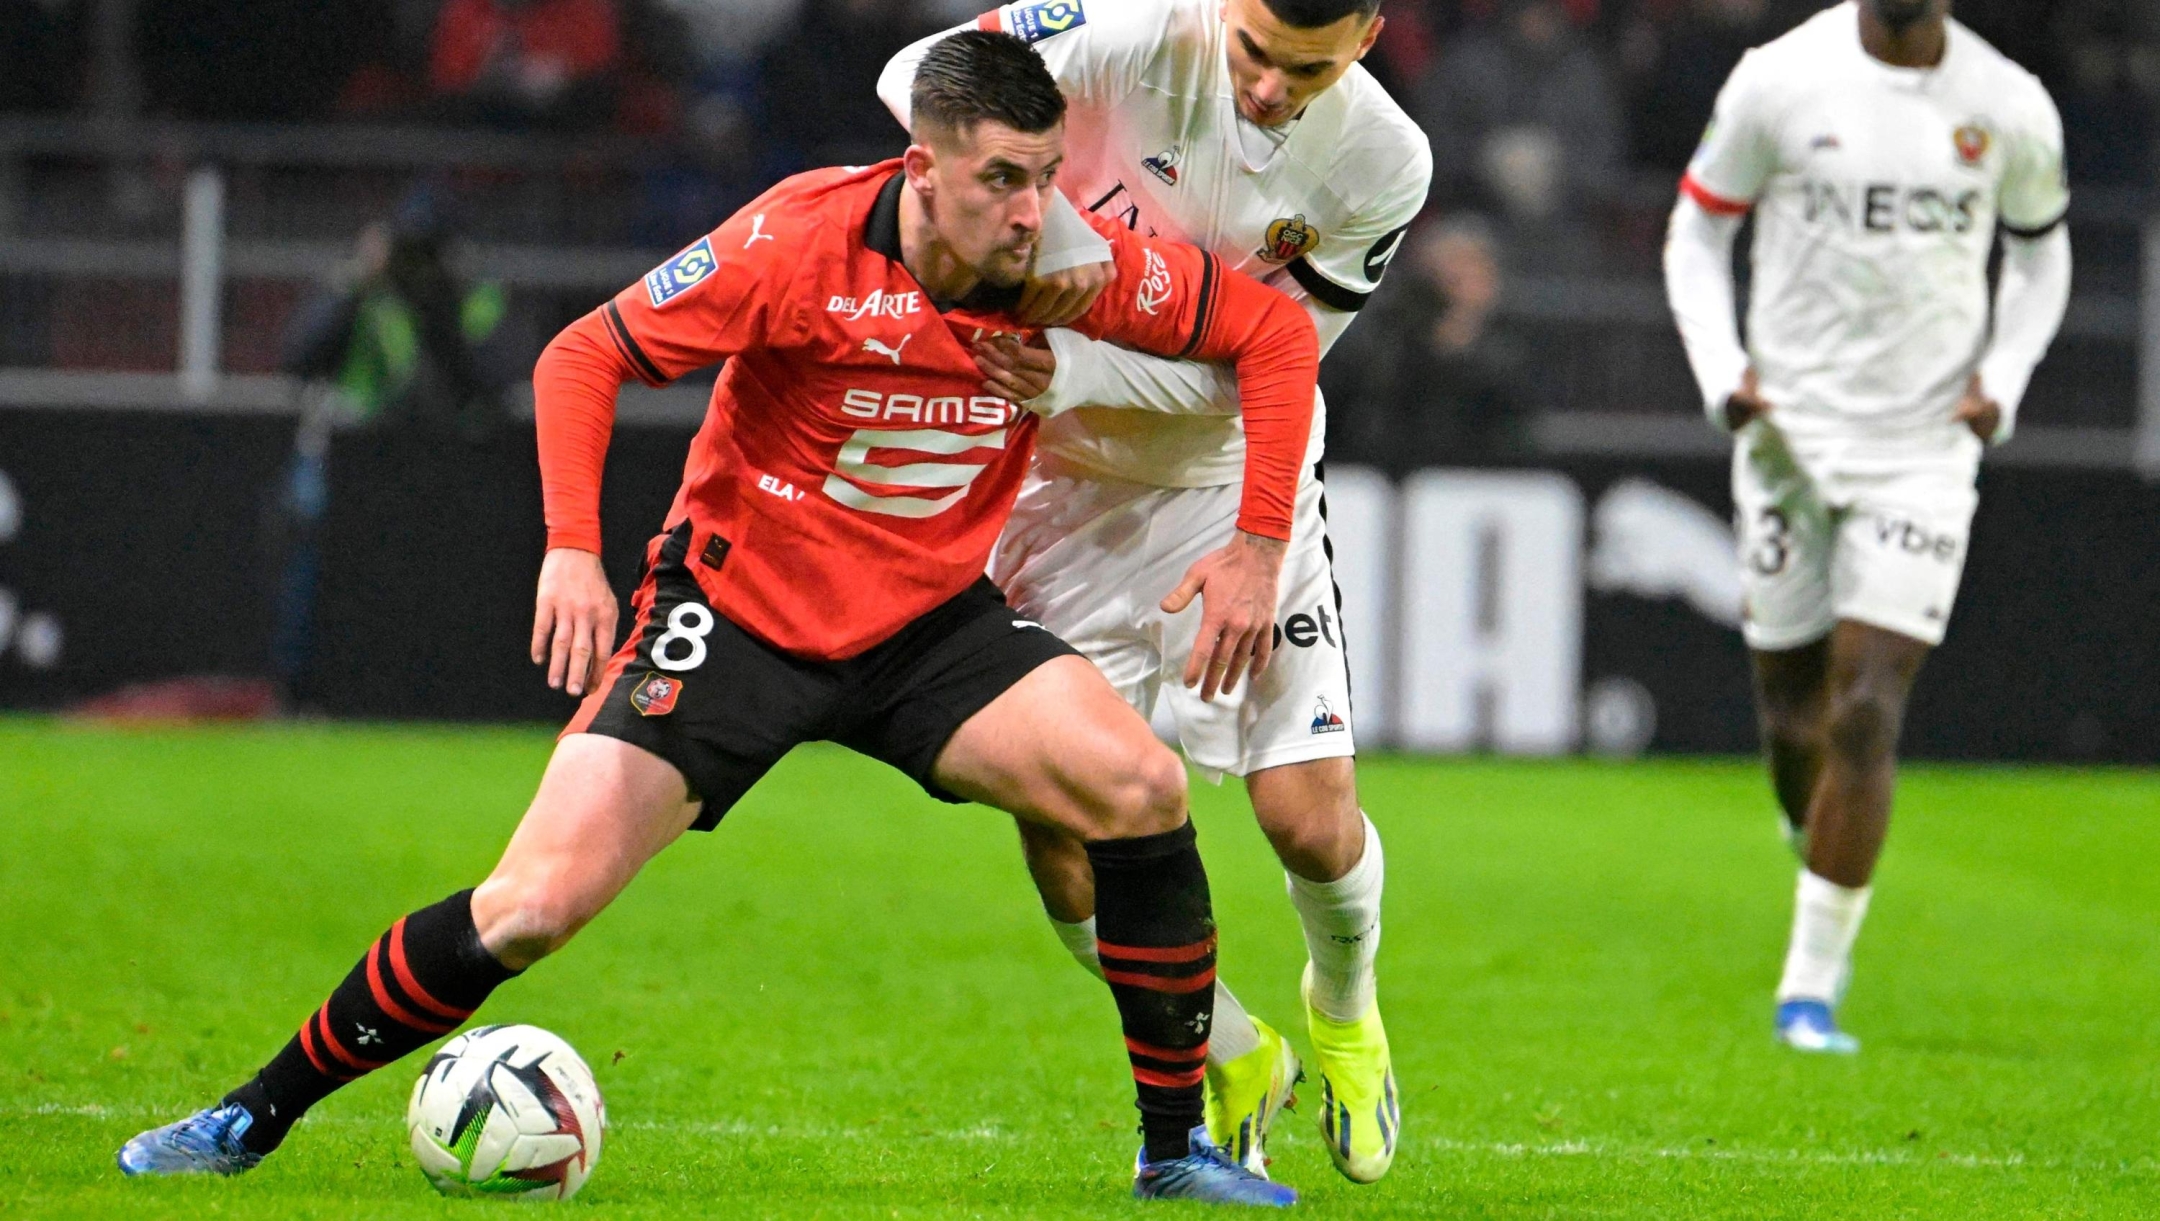 Rennes' French midfielder #08 Baptiste Santamaria (L) fights for the ball with Nice's French forward #22 Badredine Bouanani during the French L1 football match between Stade Rennais FC and OGC Nice at The Roazhon Park Stadium in Rennes, western France on January 13, 2024. (Photo by Damien Meyer / AFP)